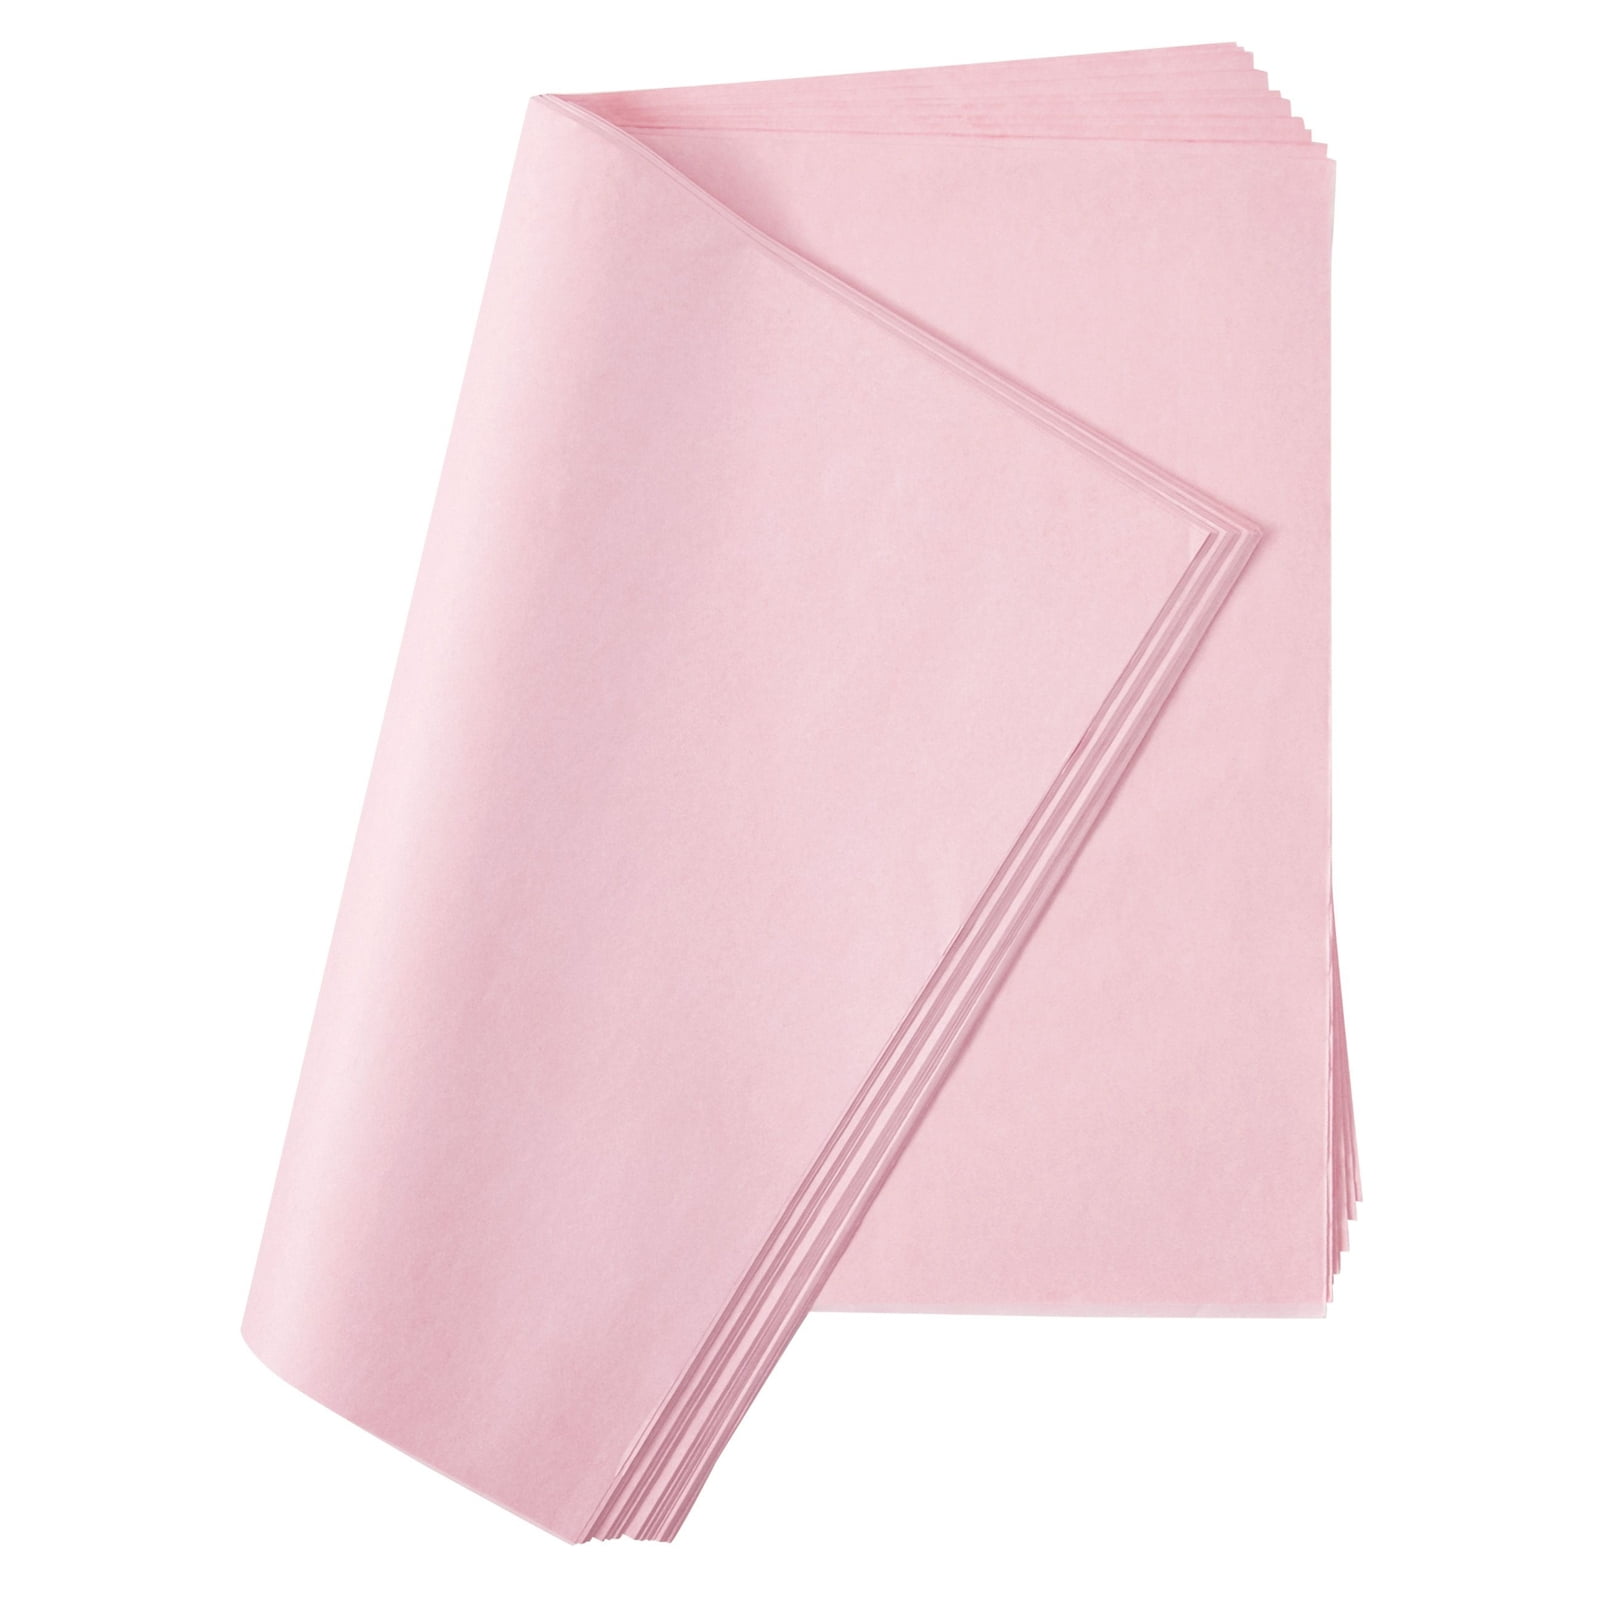 LoyGkgas New 100 Sheets Liner Tissue Paper Wrapping Shoes Clothes Gift  Packaging (Pink) 